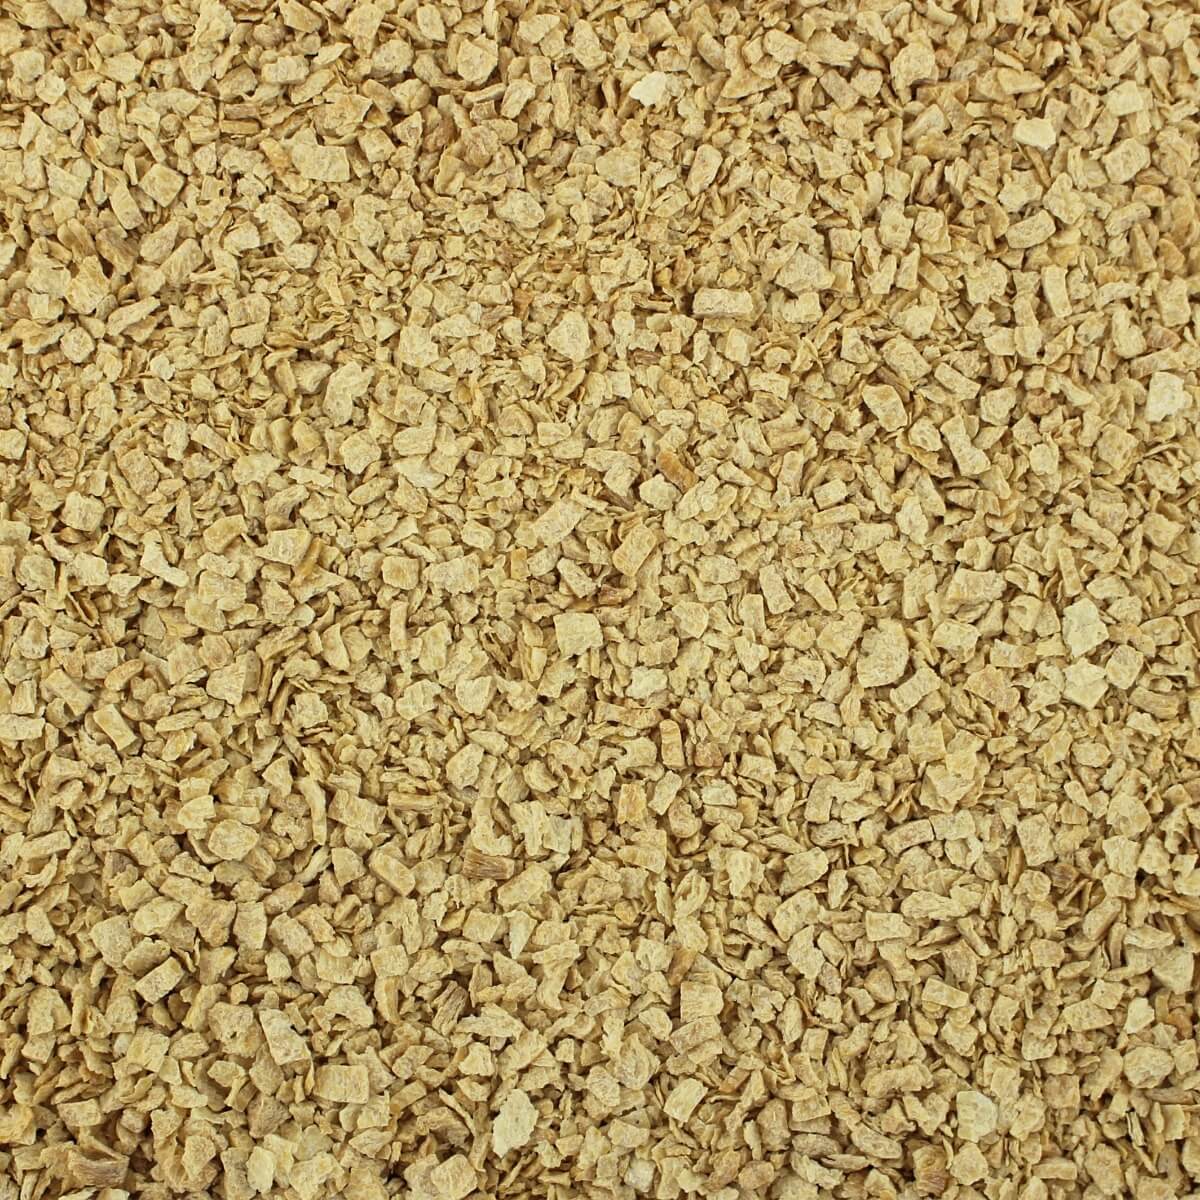 A close up image of a brown granule from the Harmony House Unflavored Plant-Based Protein Sampler.